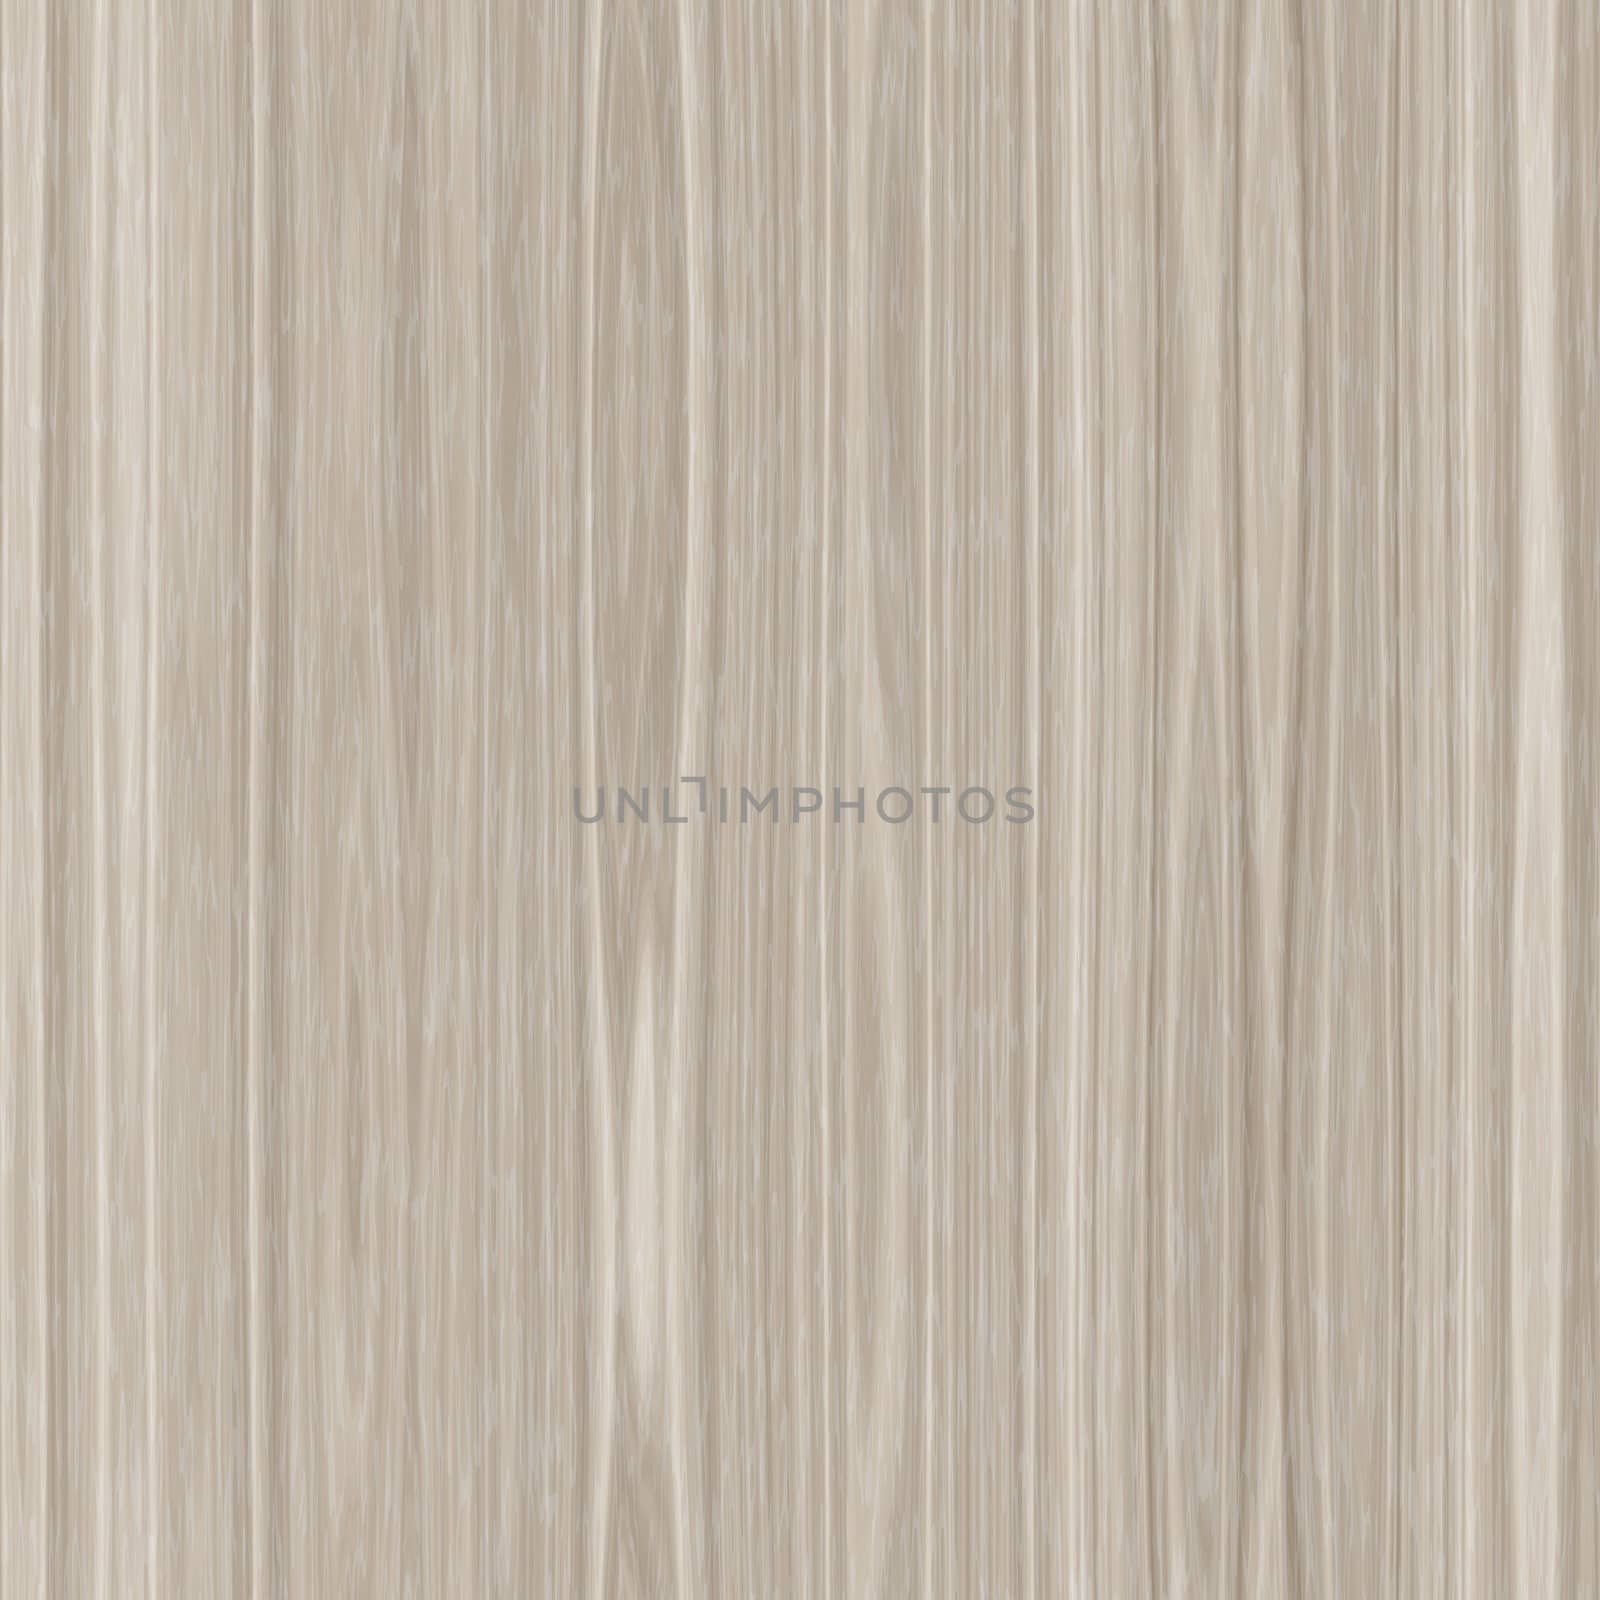 a nice large wood texture or background image